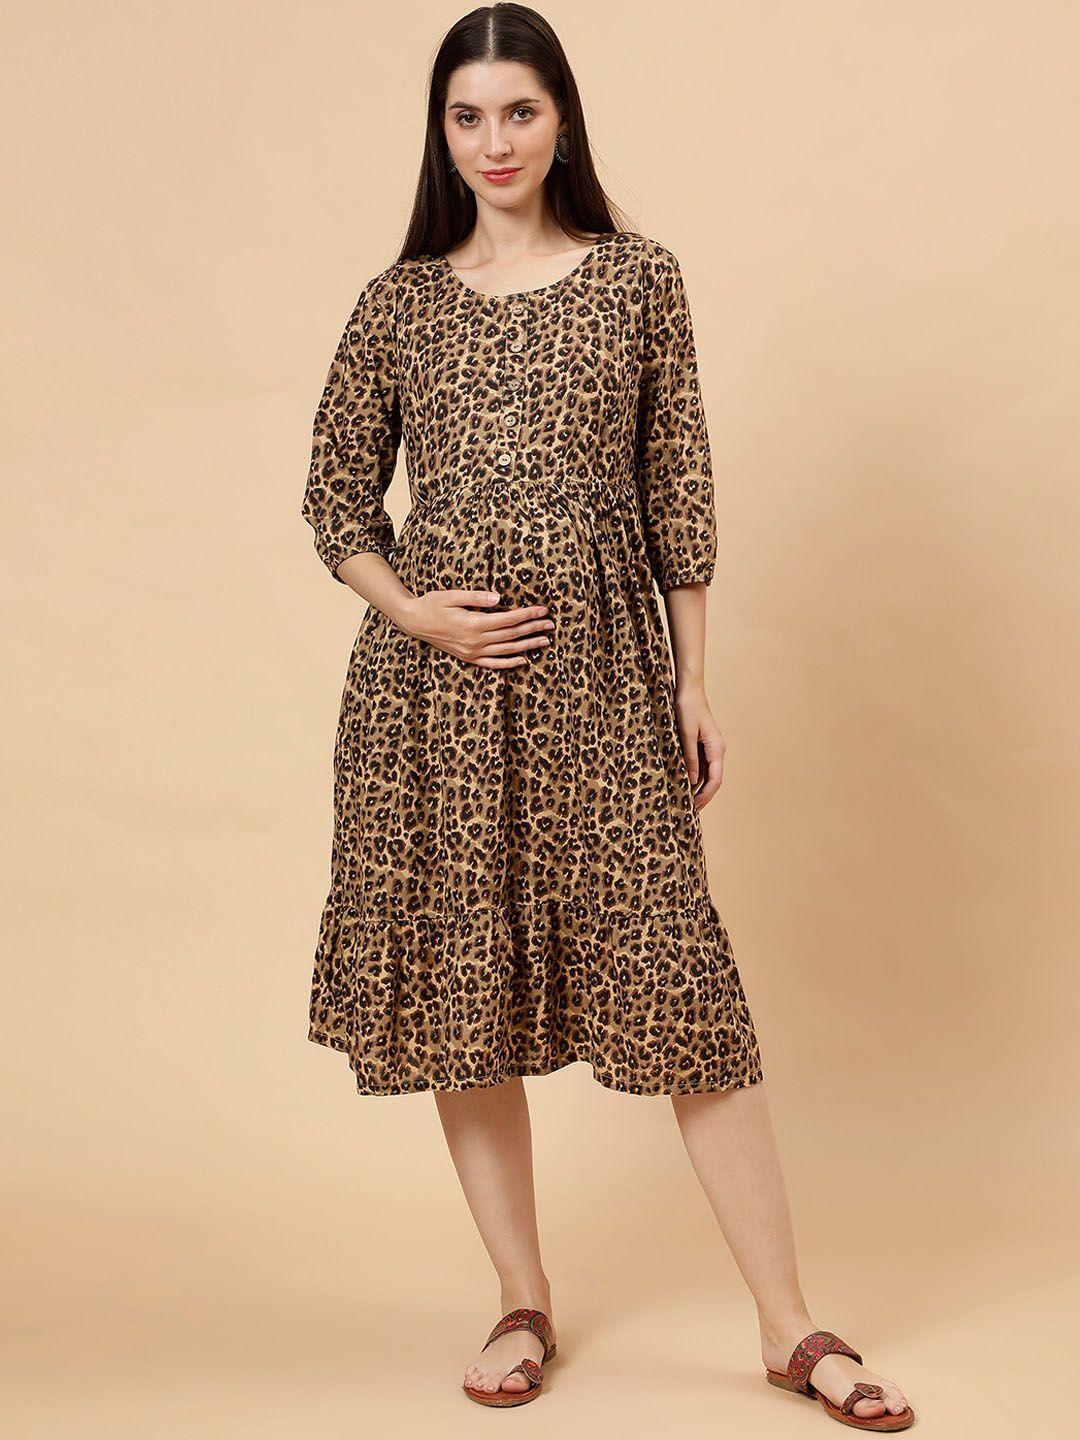 cot'n soft animal printed pure cotton fit & flare maternity dress